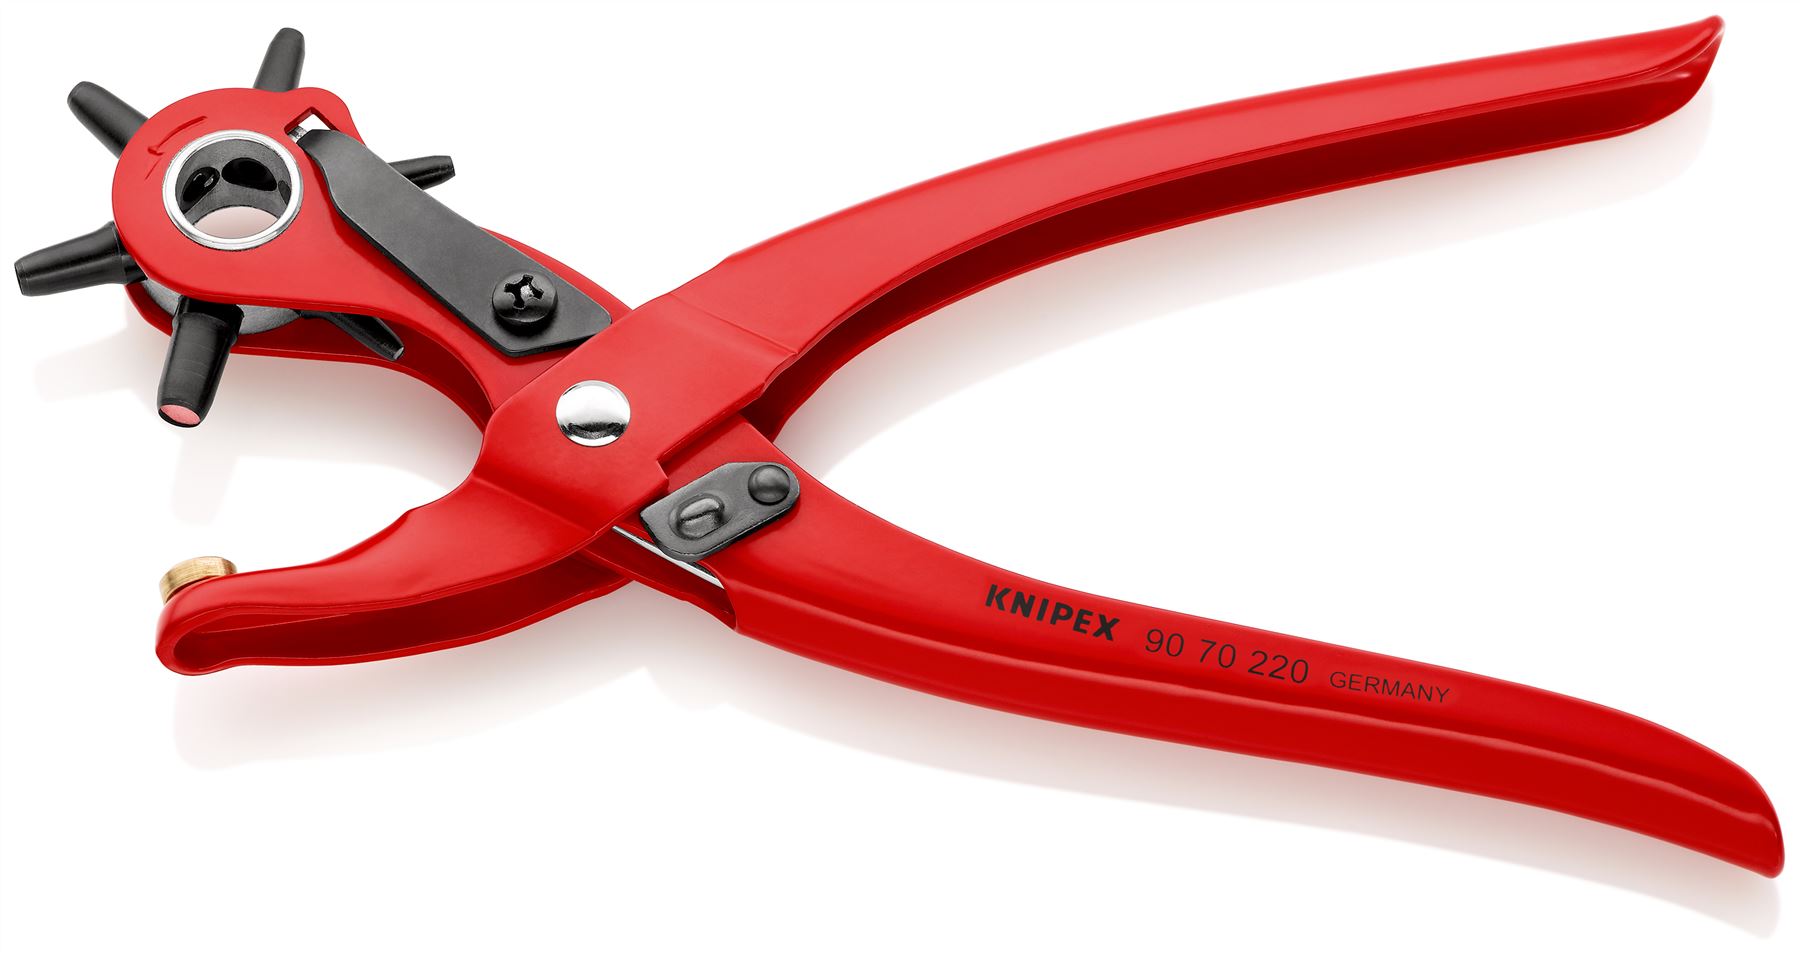 KNIPEX Revolving Punch Pliers 2-5mm Capacity 220mm for Fabrics Leather Paper Soft Plastic 90 70 220